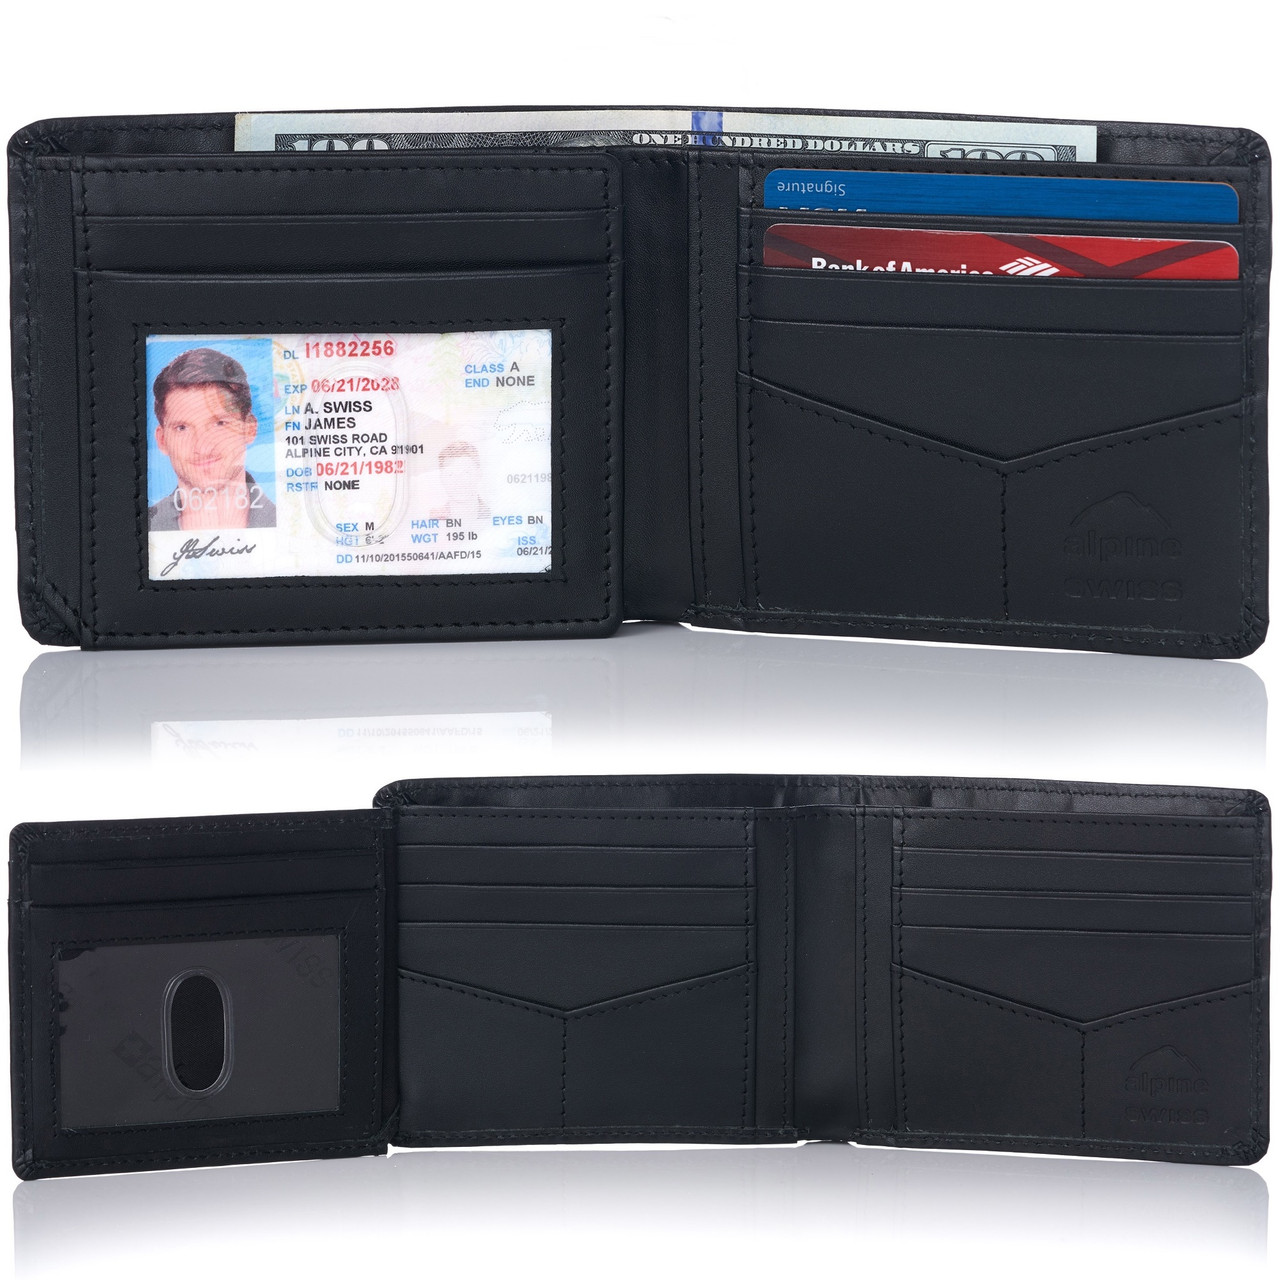 Leather Hybrid Wallet with Zipper Pocket